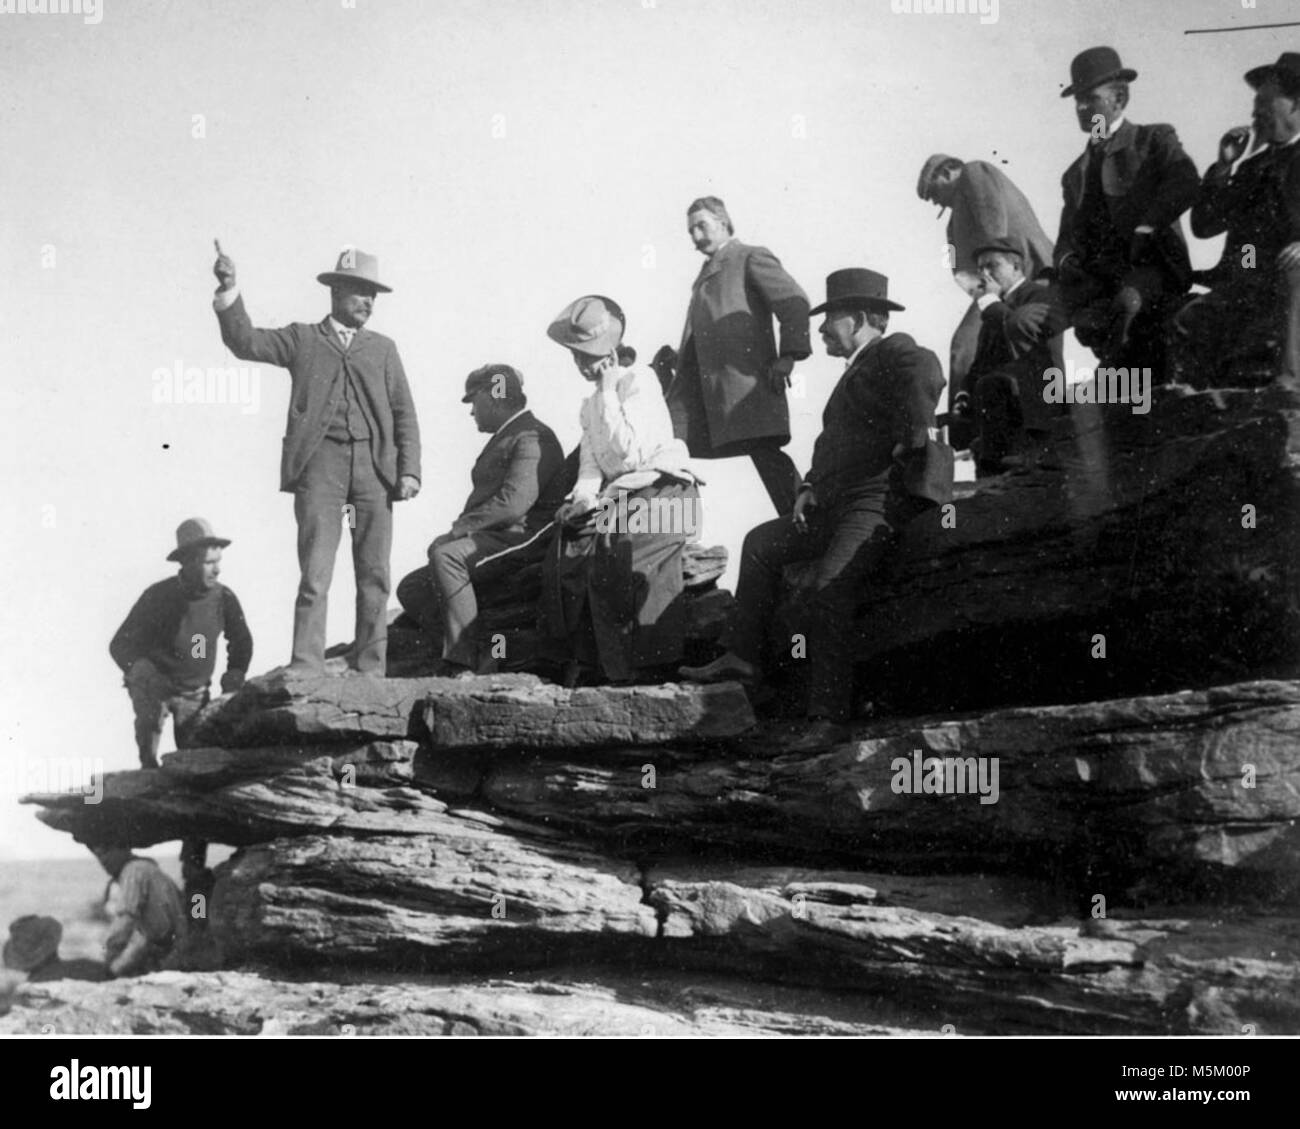 Grand Canyon Historic Bass Trails William Bass . MR. BASS LECTURING TO THE HEARST PARTY AT HEAD OF THE BASS TRAIL. CIRCA 1908. PUB. Stock Photo